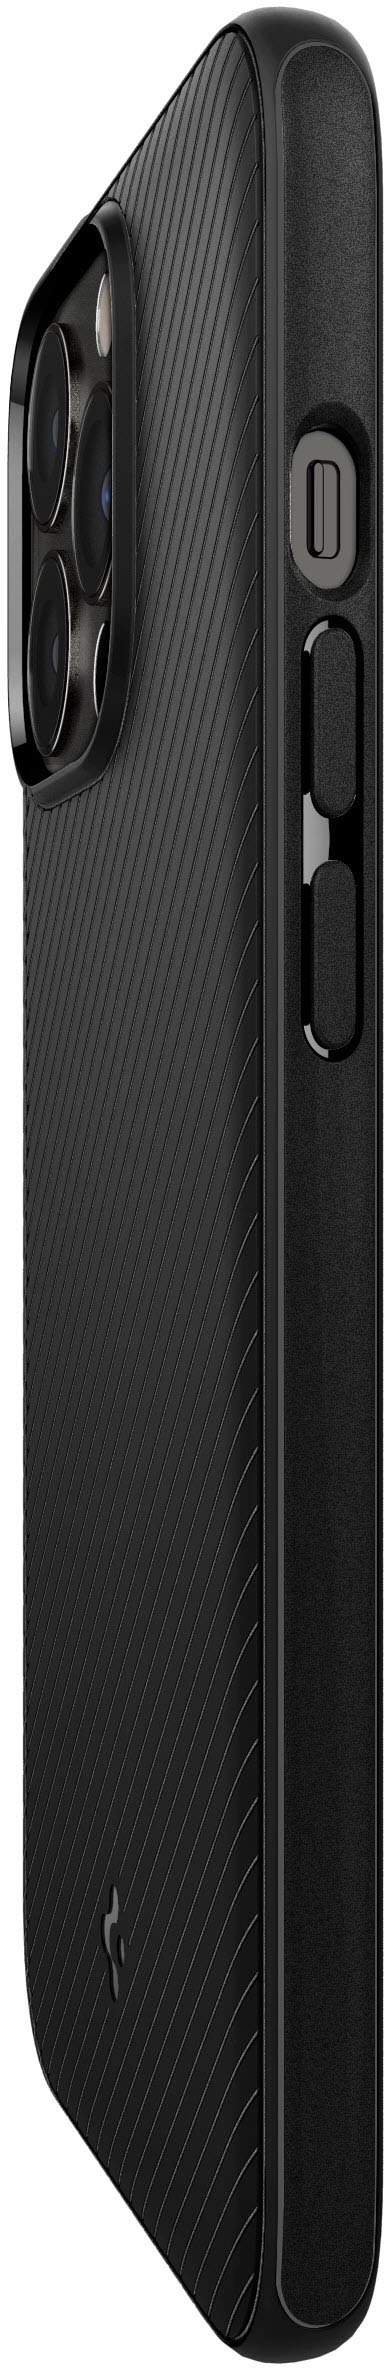 Spigen Core Armor Hard Shell Case with MagSafe Apple iPhone 13 Pro Max &  iPhone 12 Pro Max Black 55782BBR - Best Buy